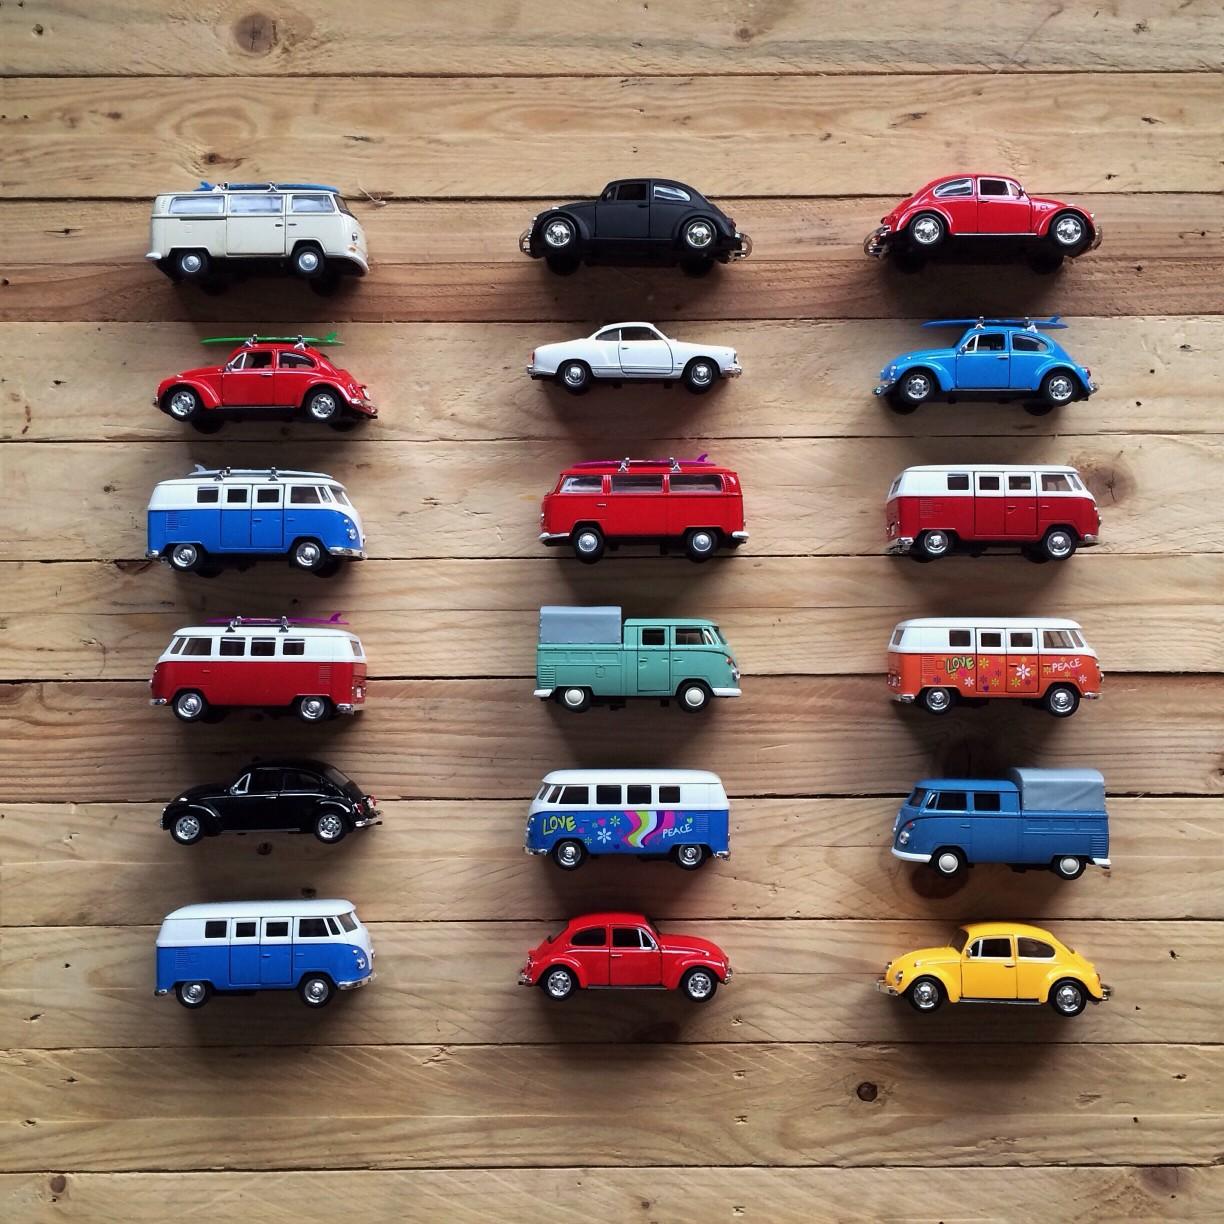 Matchbox is giving toy cars a big makeover | Twenty20